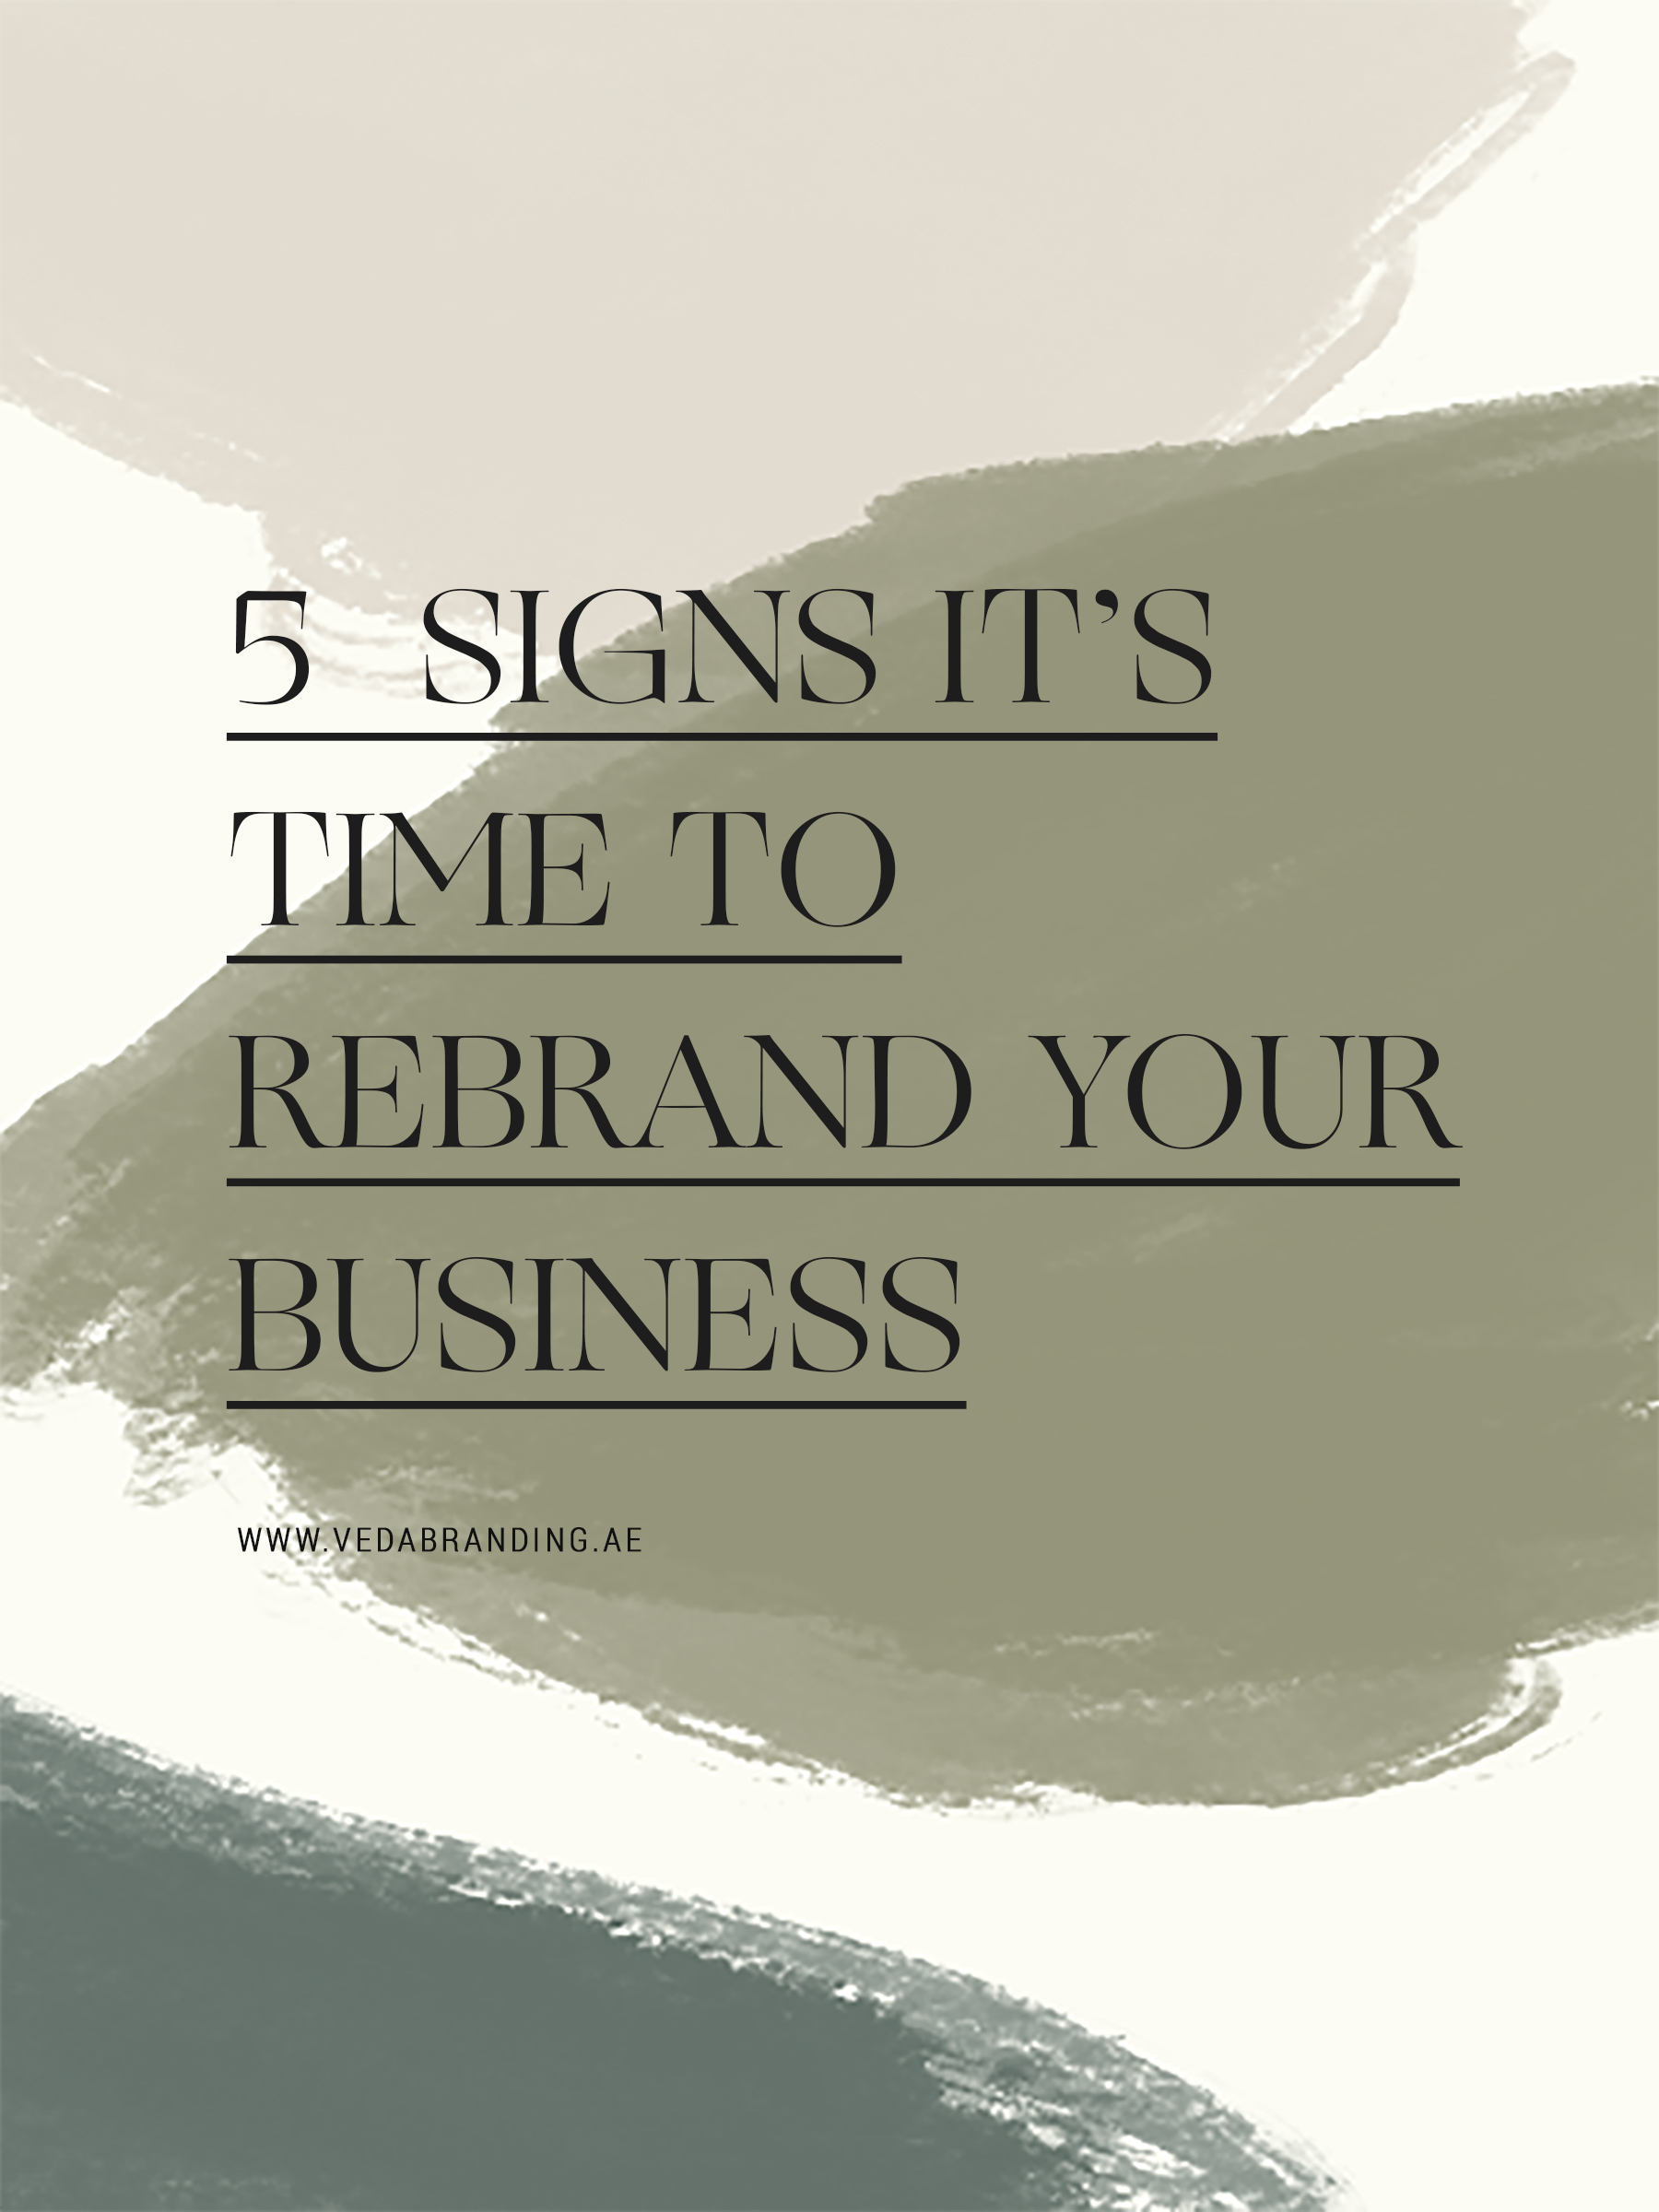 5 Signs It's Time to Rebrand Your Business